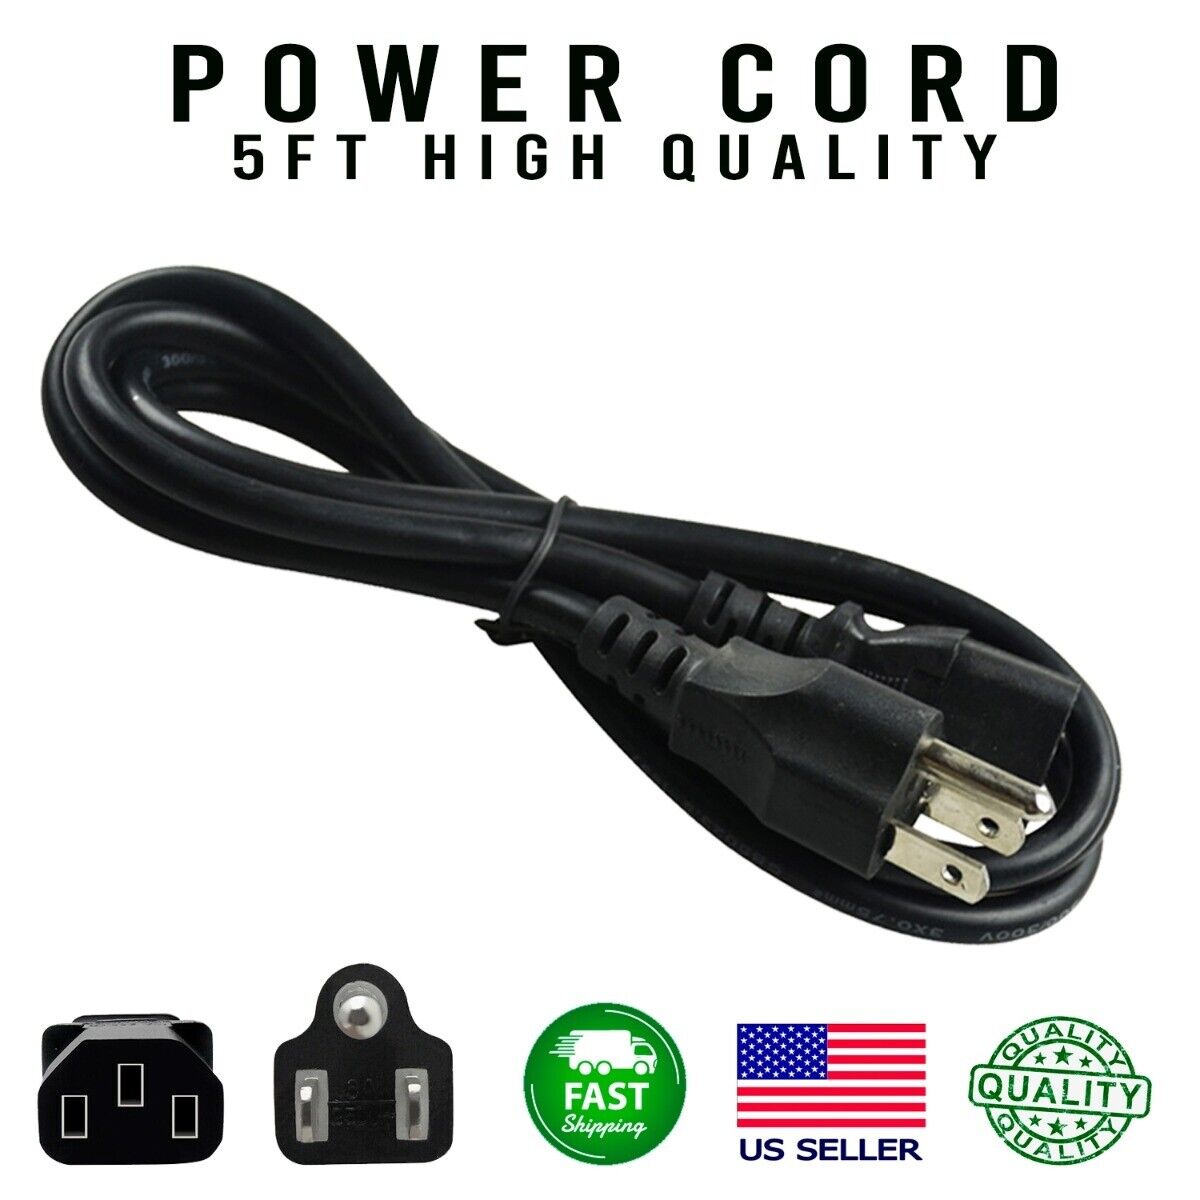 Lot of 1-100 AC Power Cord Cable 3 Prong Plug 5FT Standard PC Computer Monitor